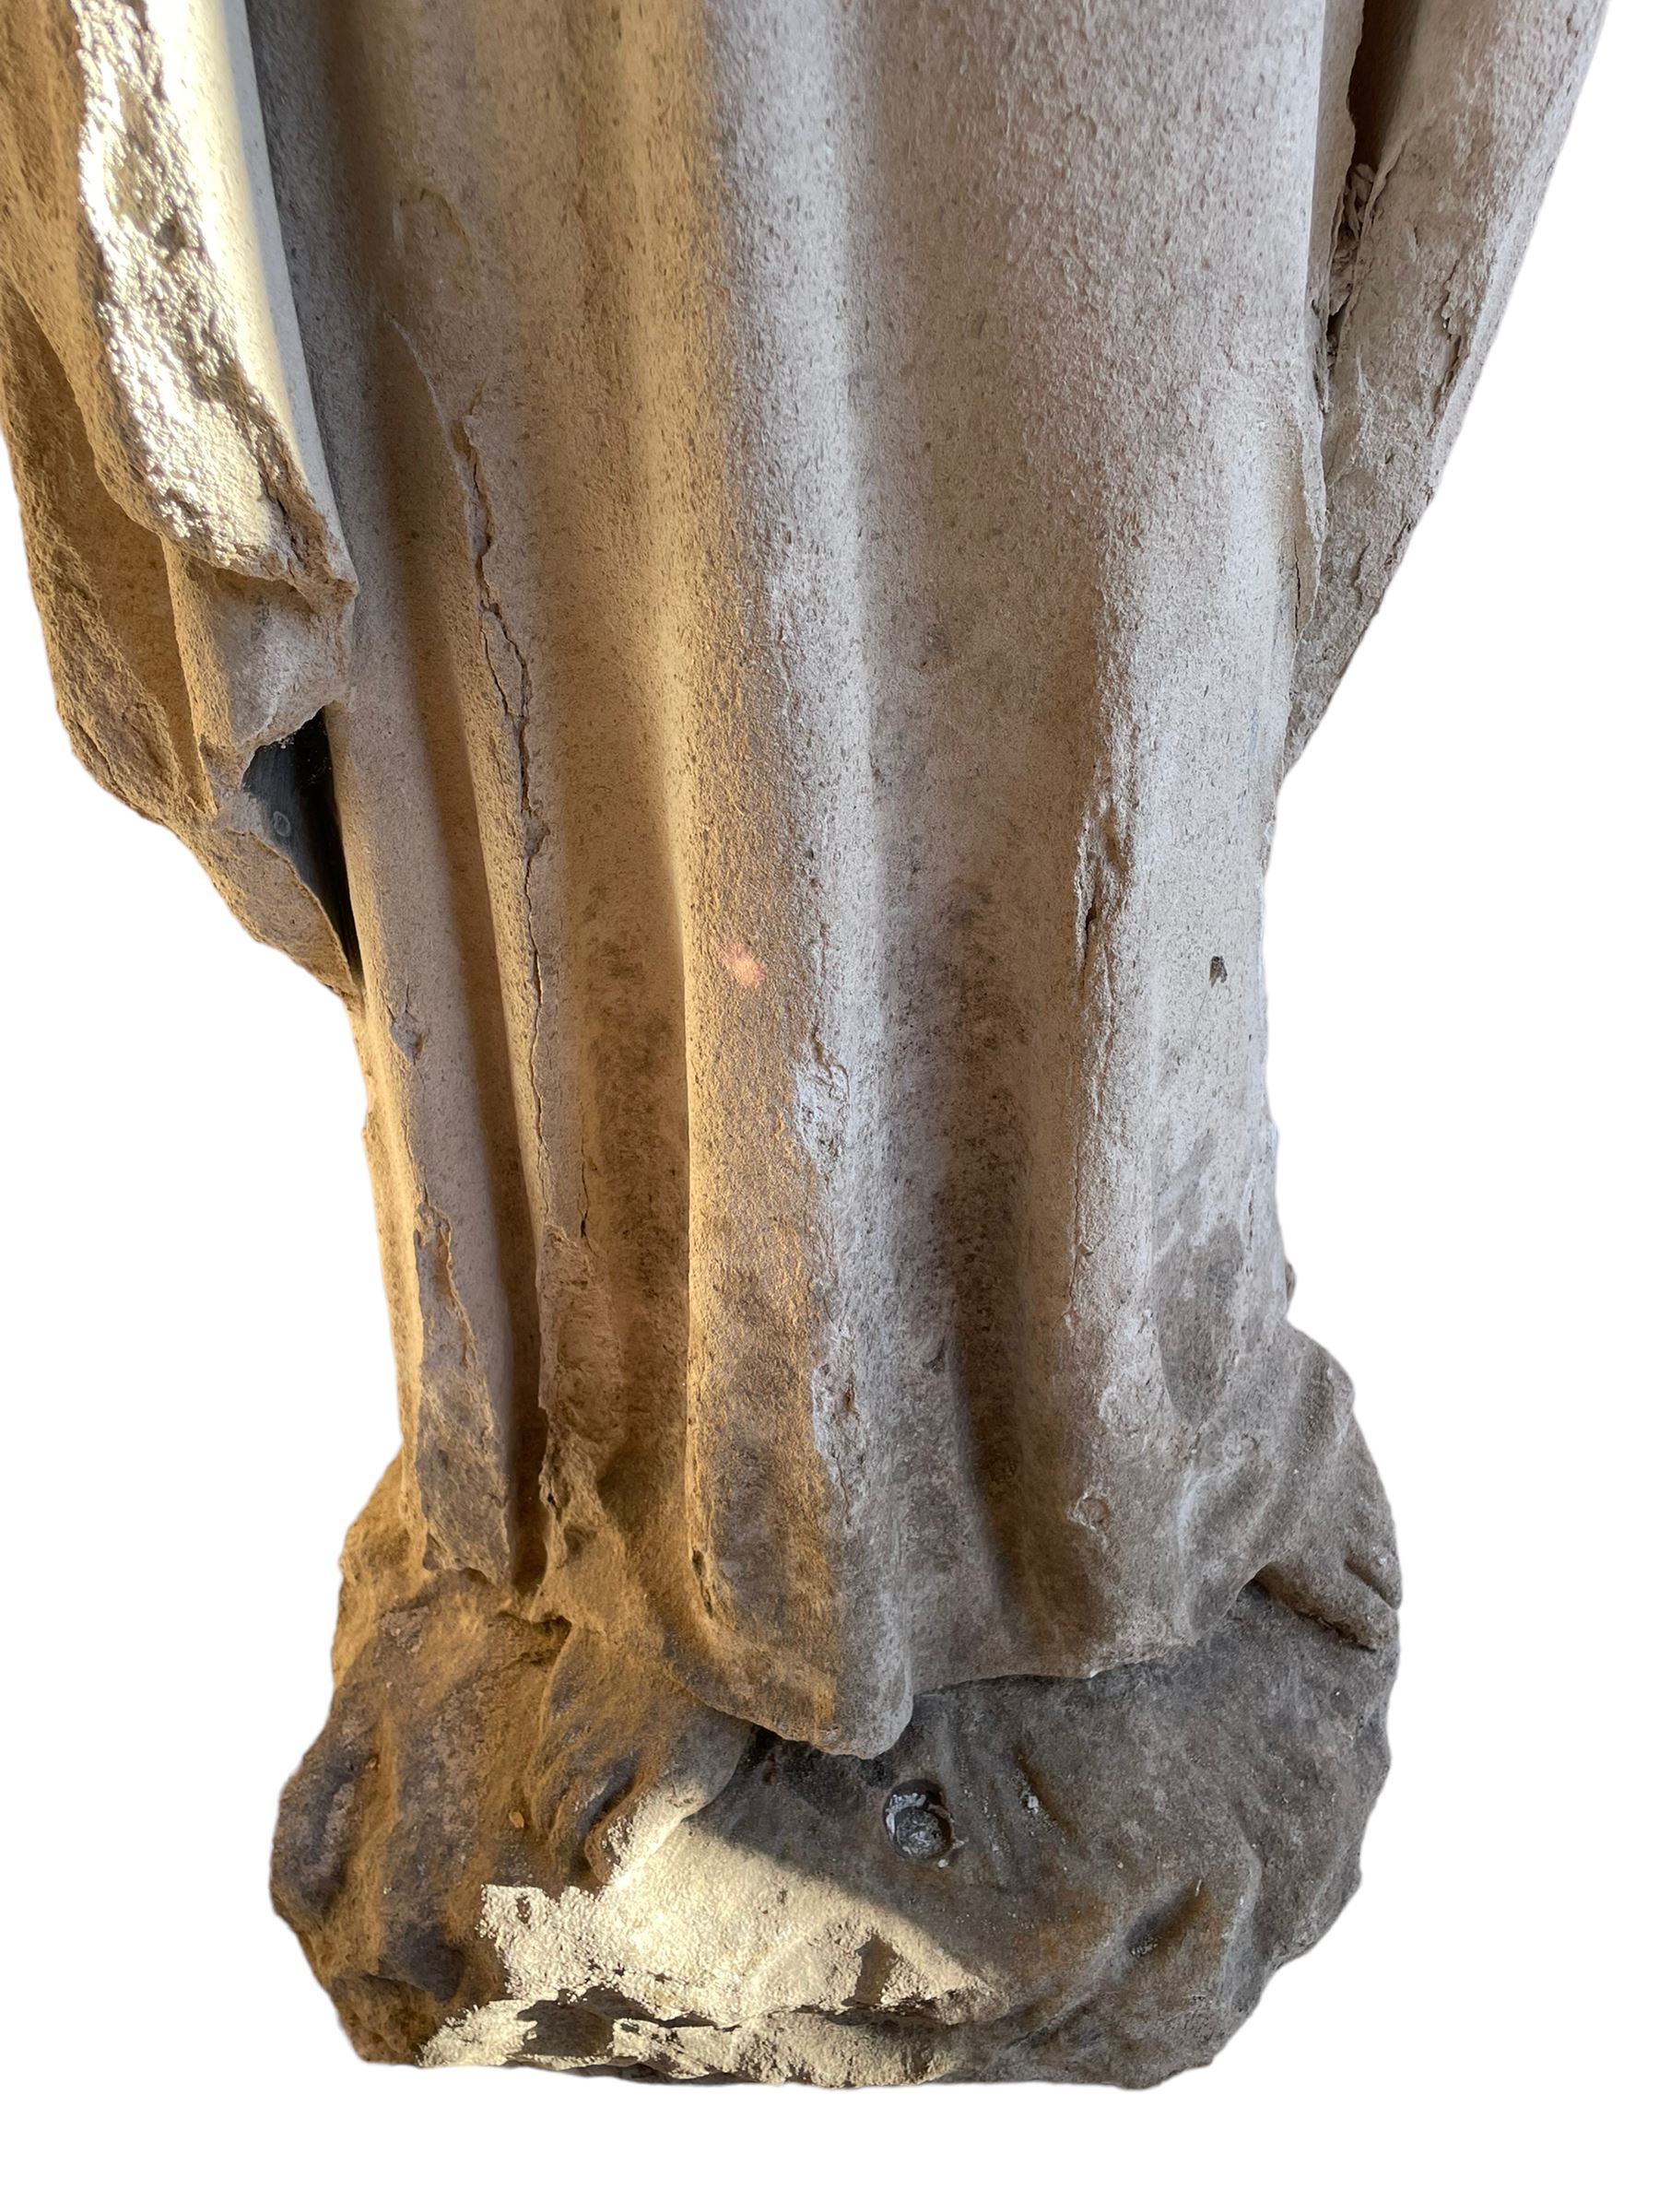 19th century weathered carved sandstone figure of Jesus Christ depicted as the Good Shepherd - Image 6 of 7